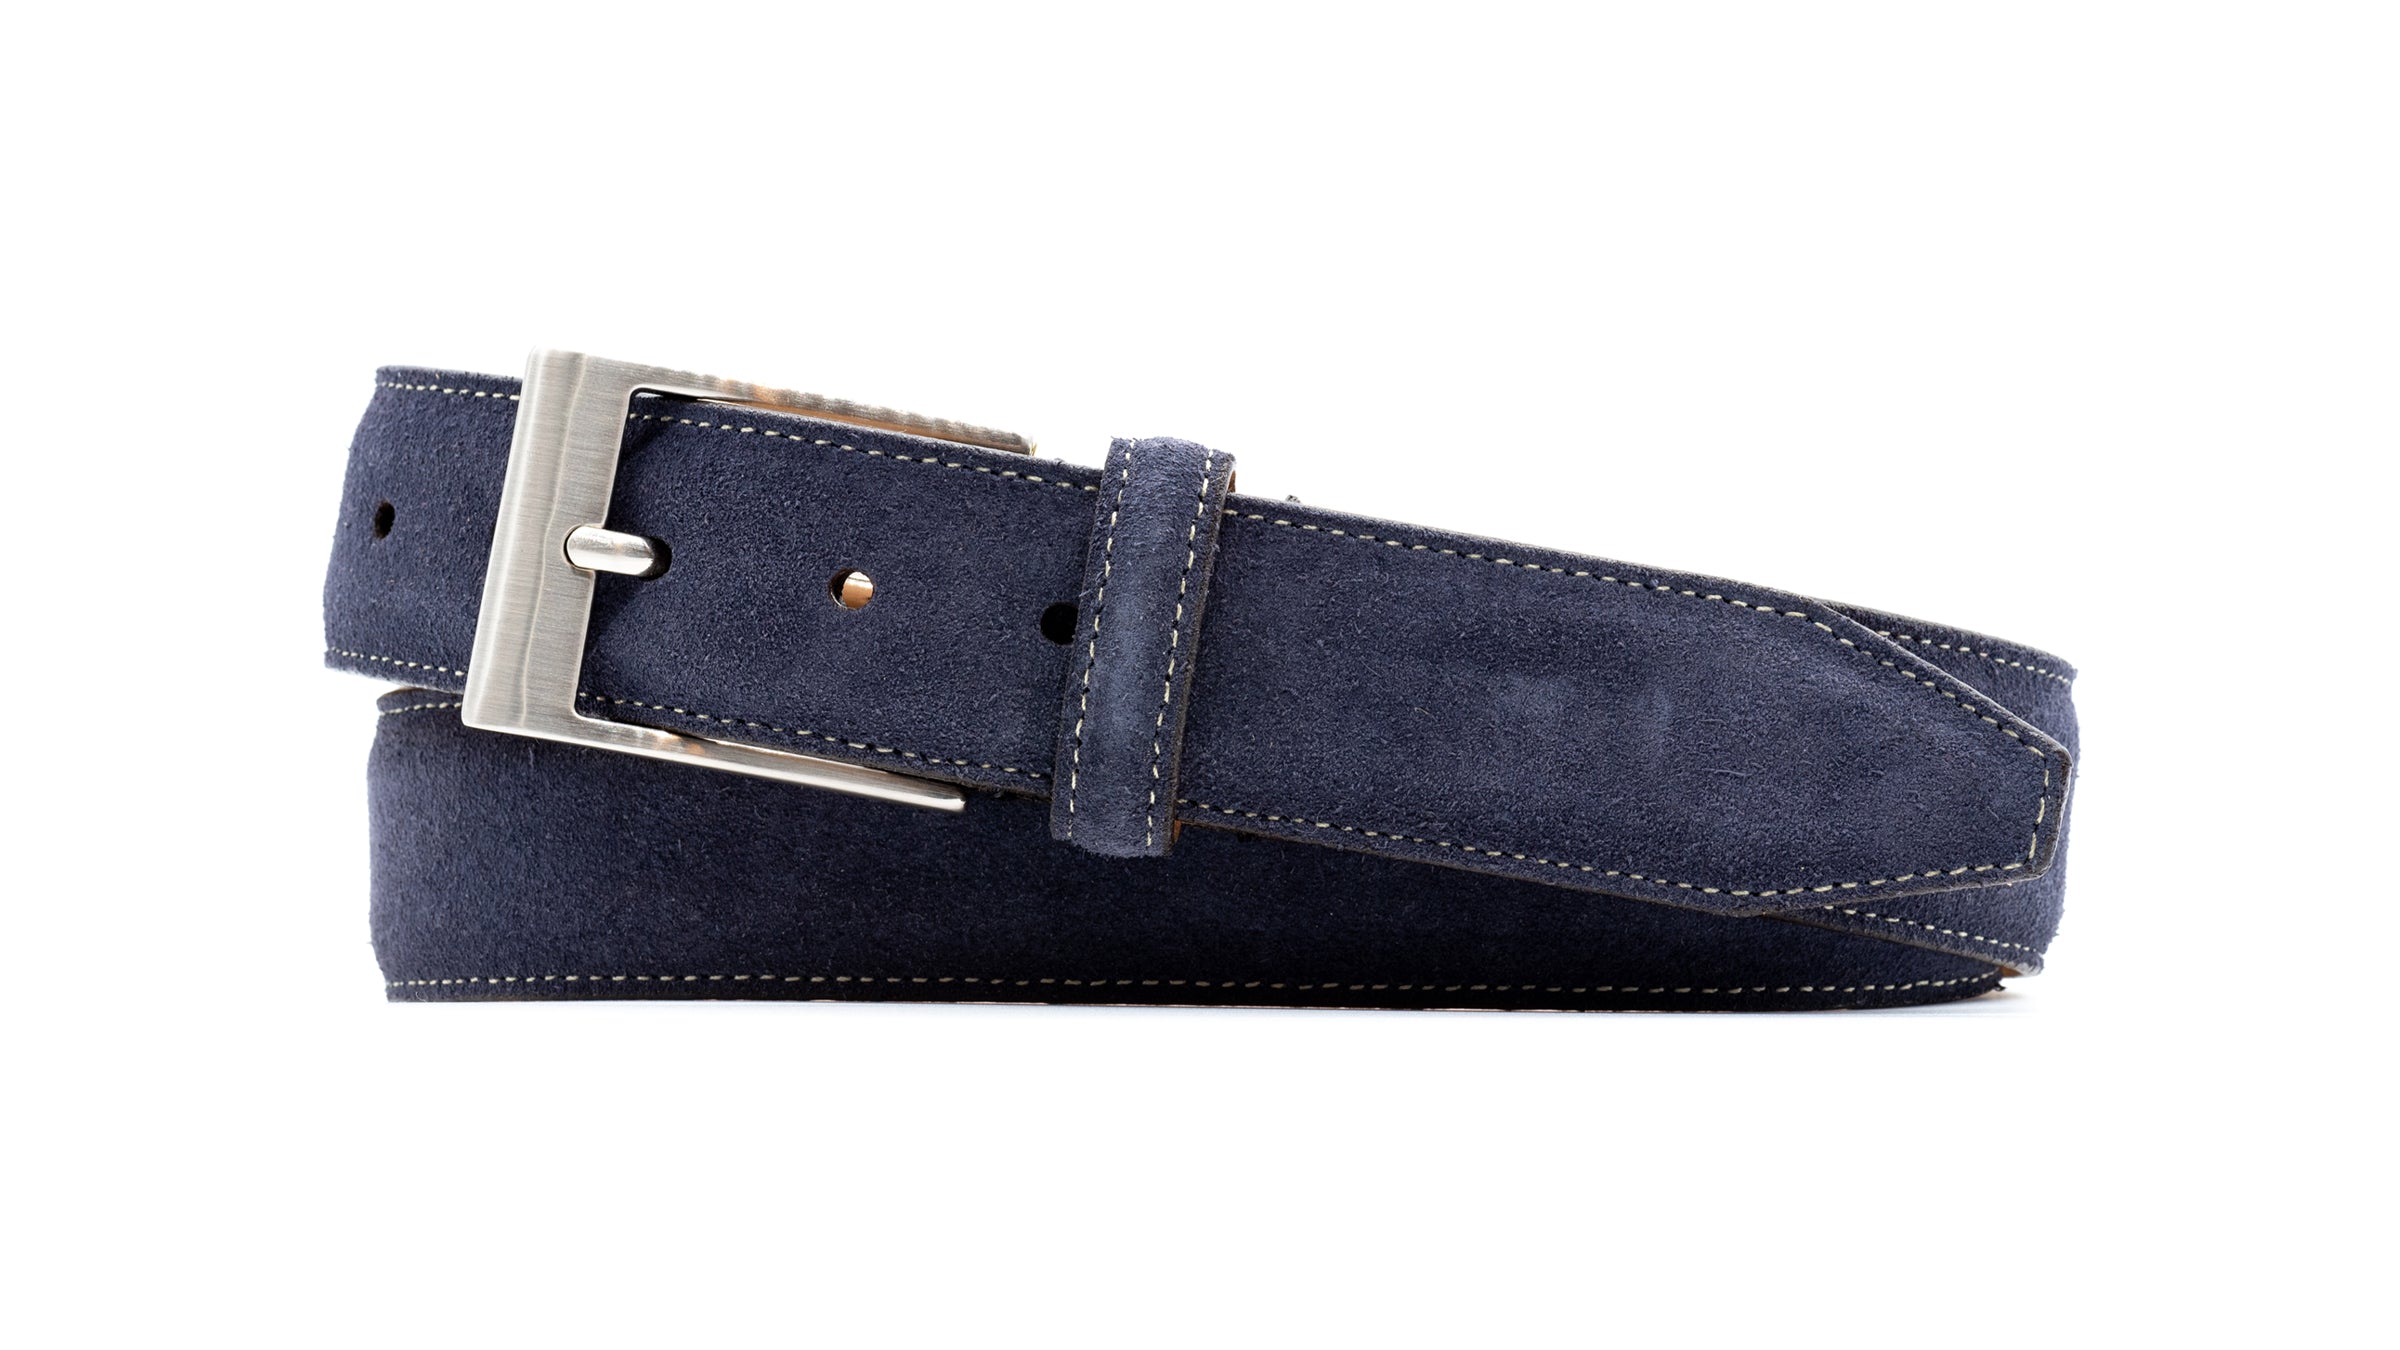 Royal Water Repellent Suede Leather Belt - Navy